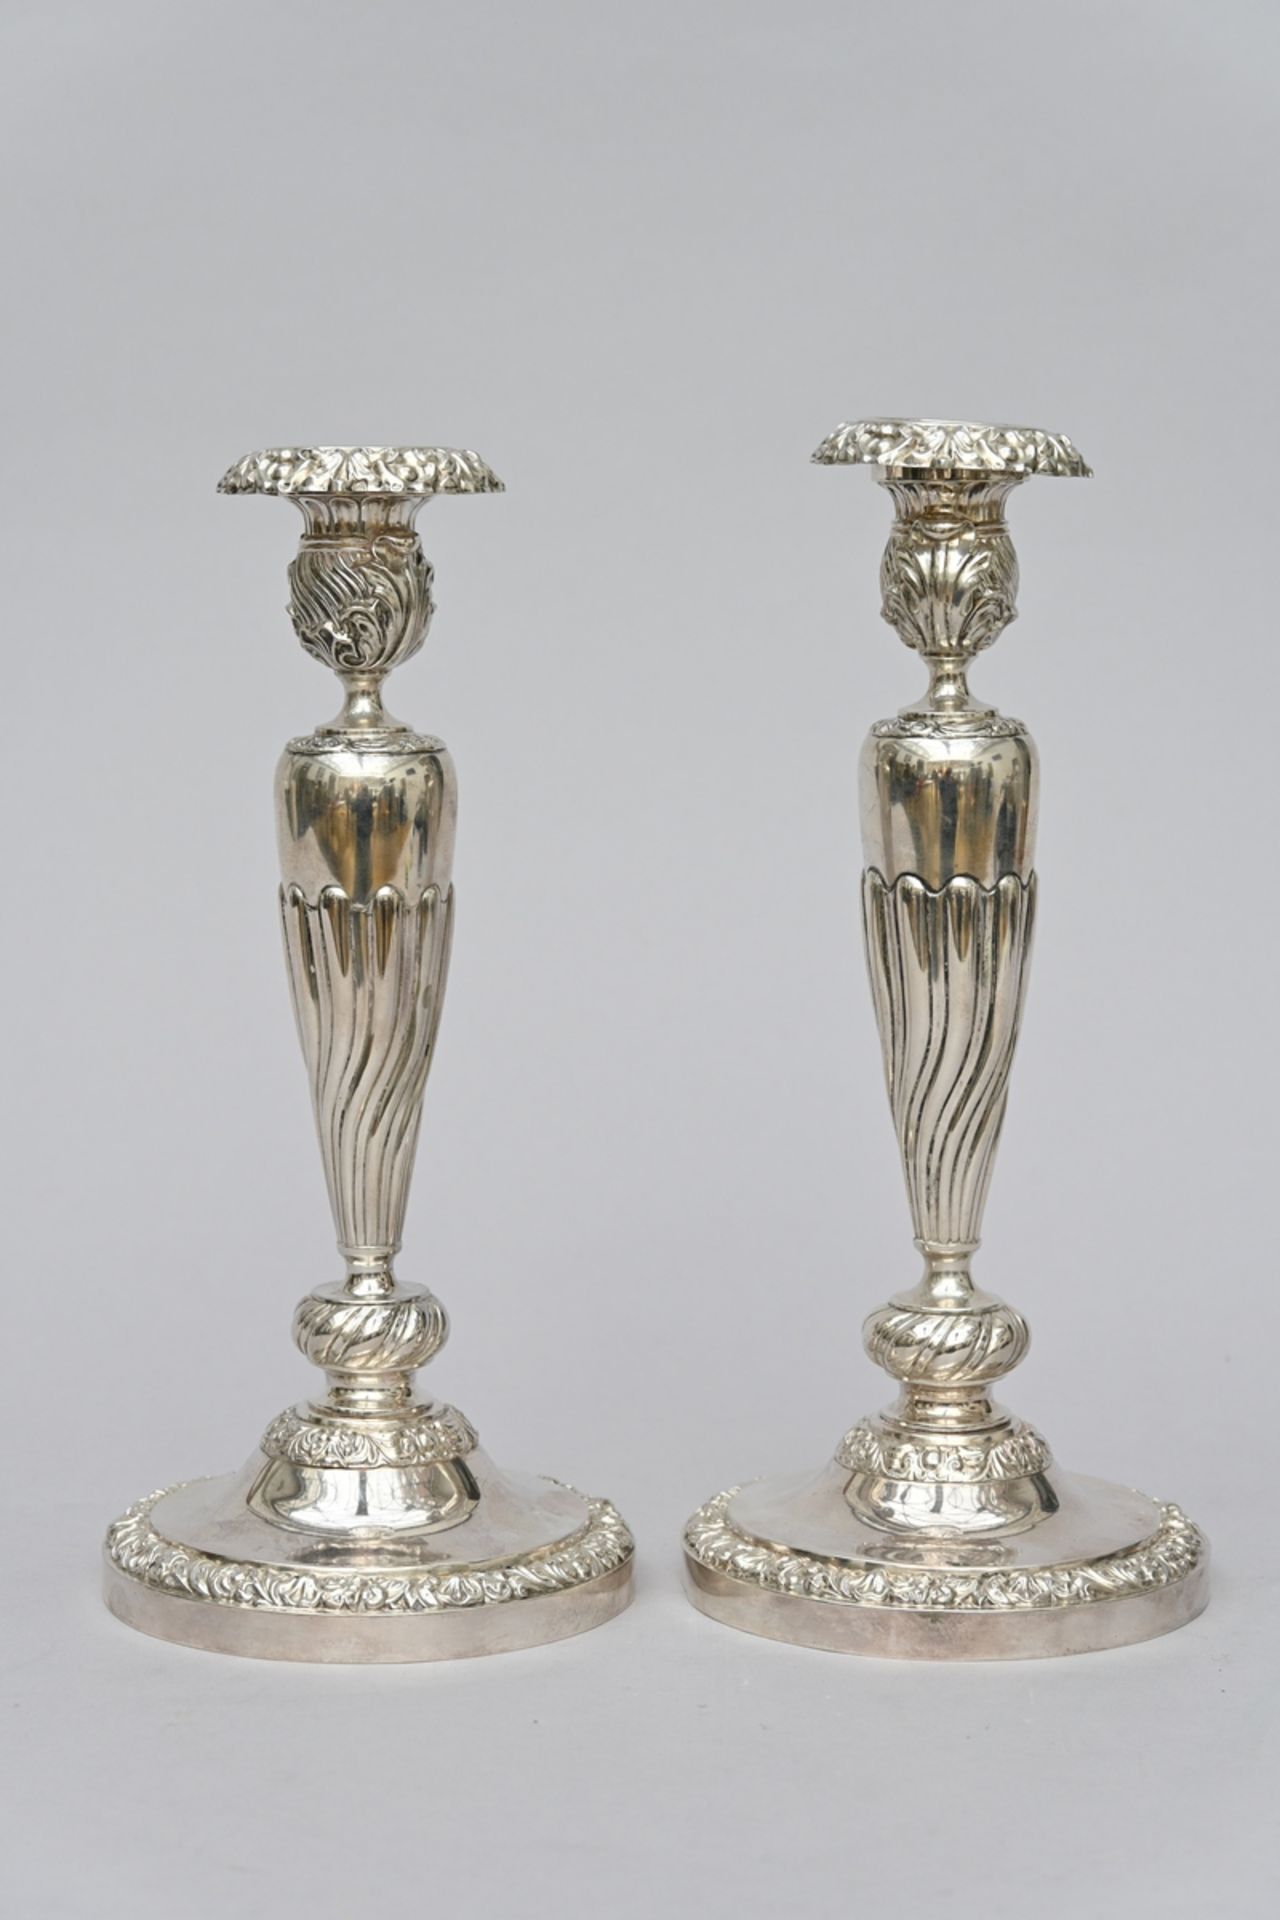 A pair of silver Louis-Philippe candlesticks, Liege 19th century (h31cm) (weight 770gr)